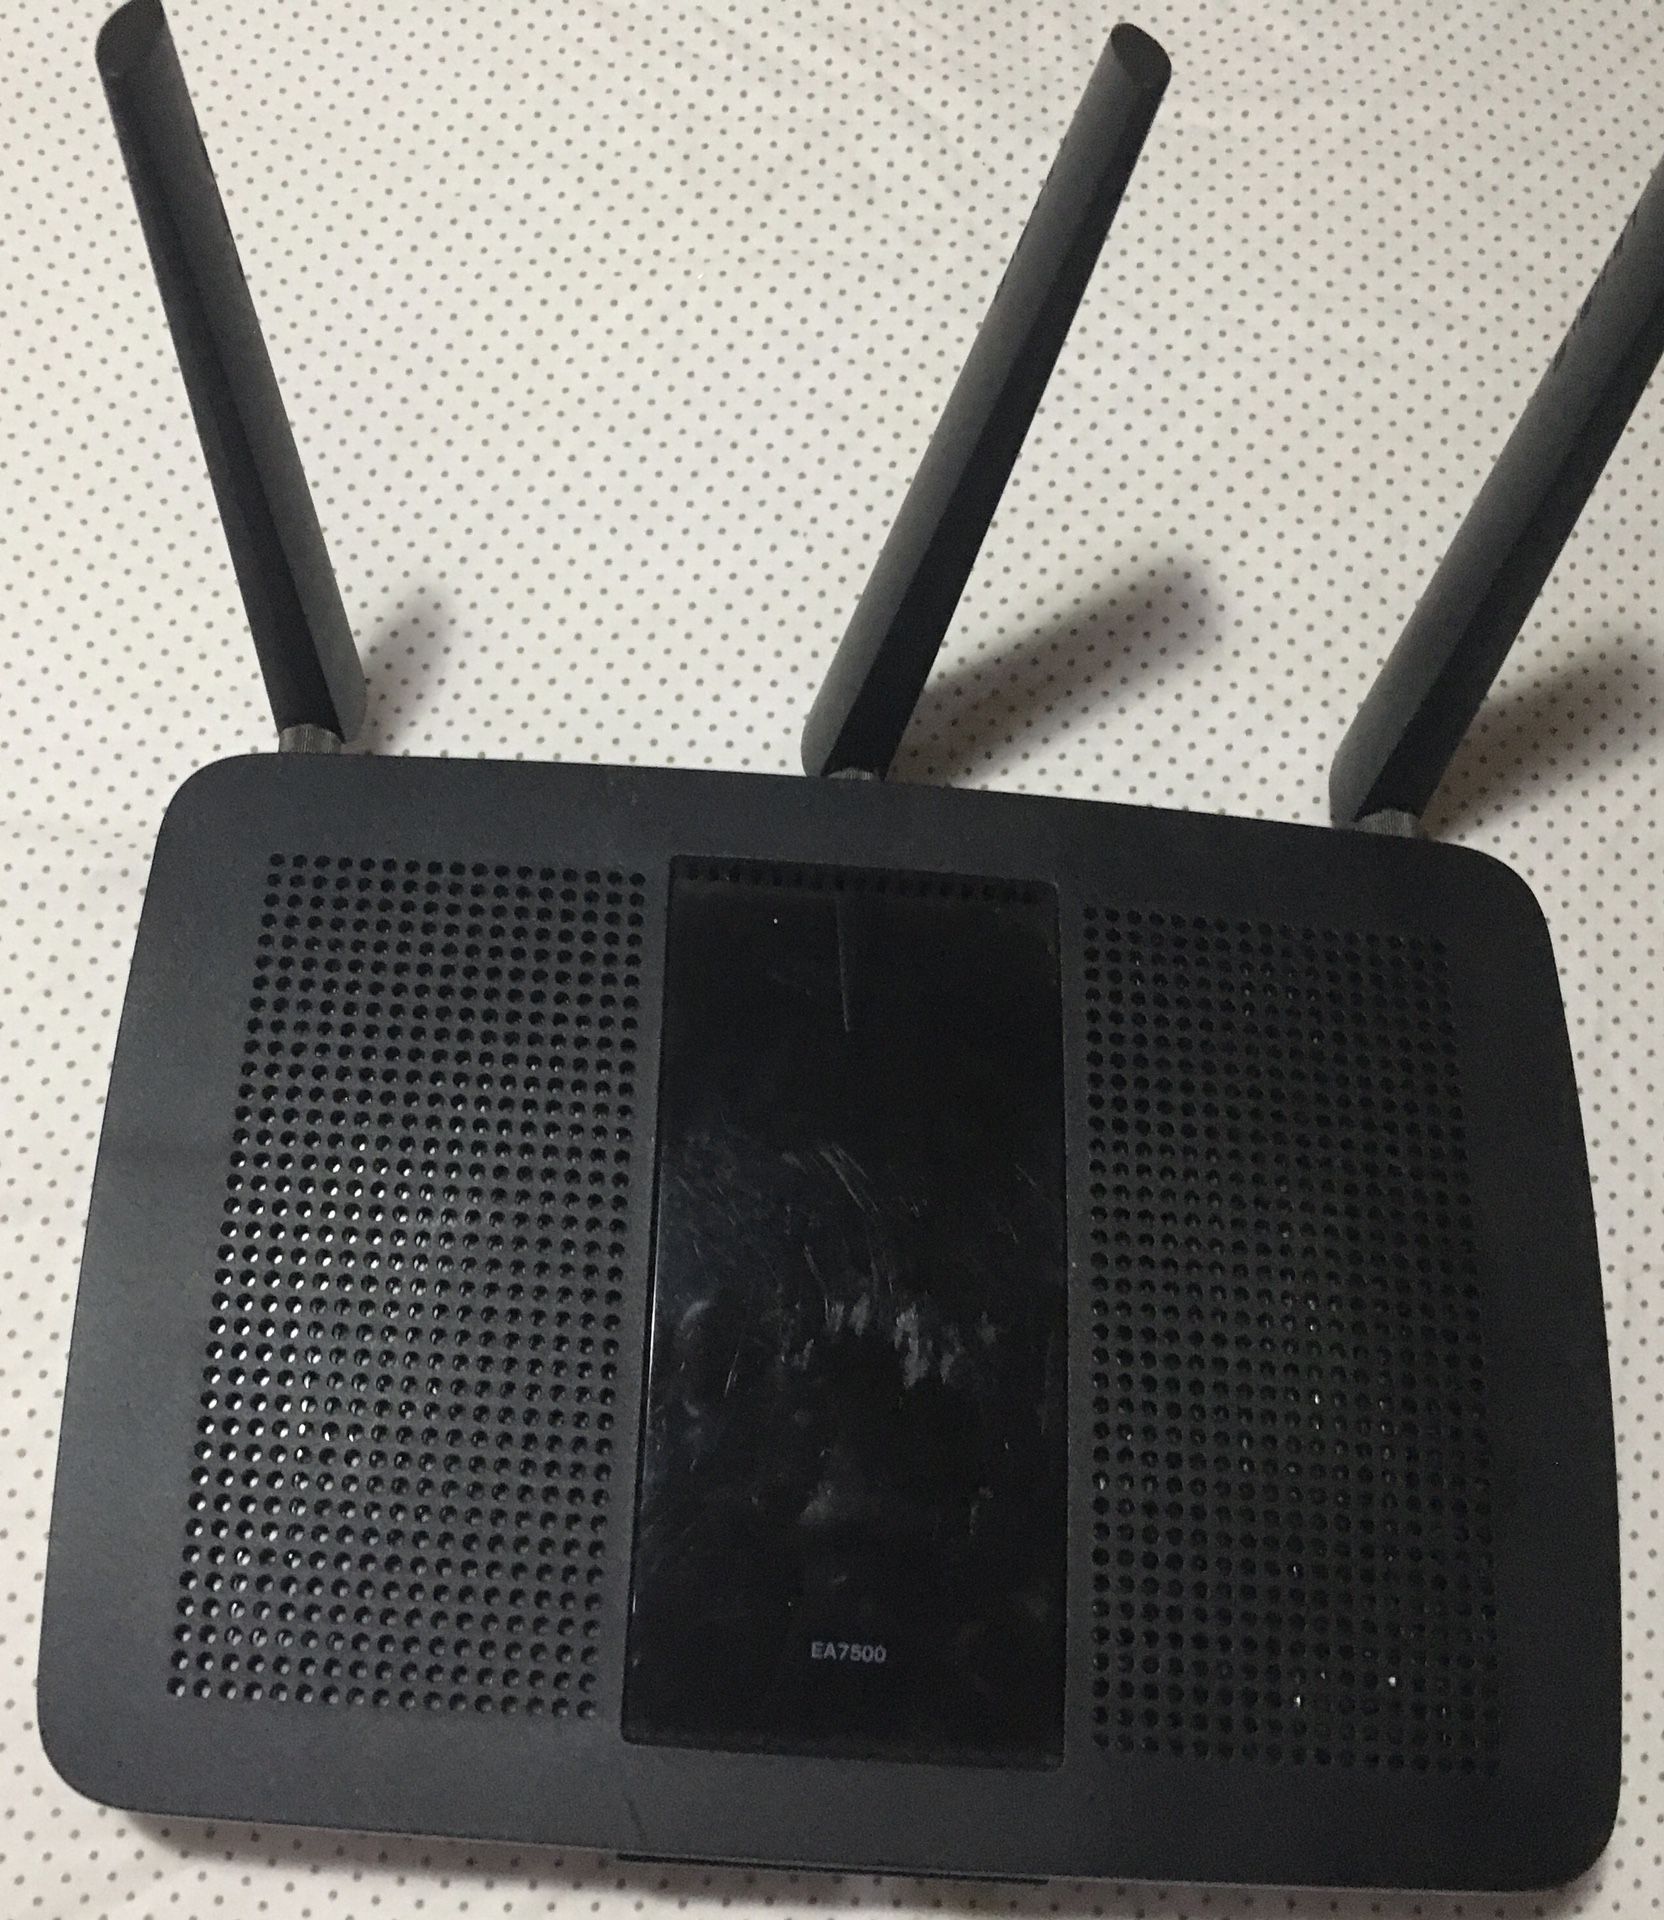 Linksys Ea7500 Router